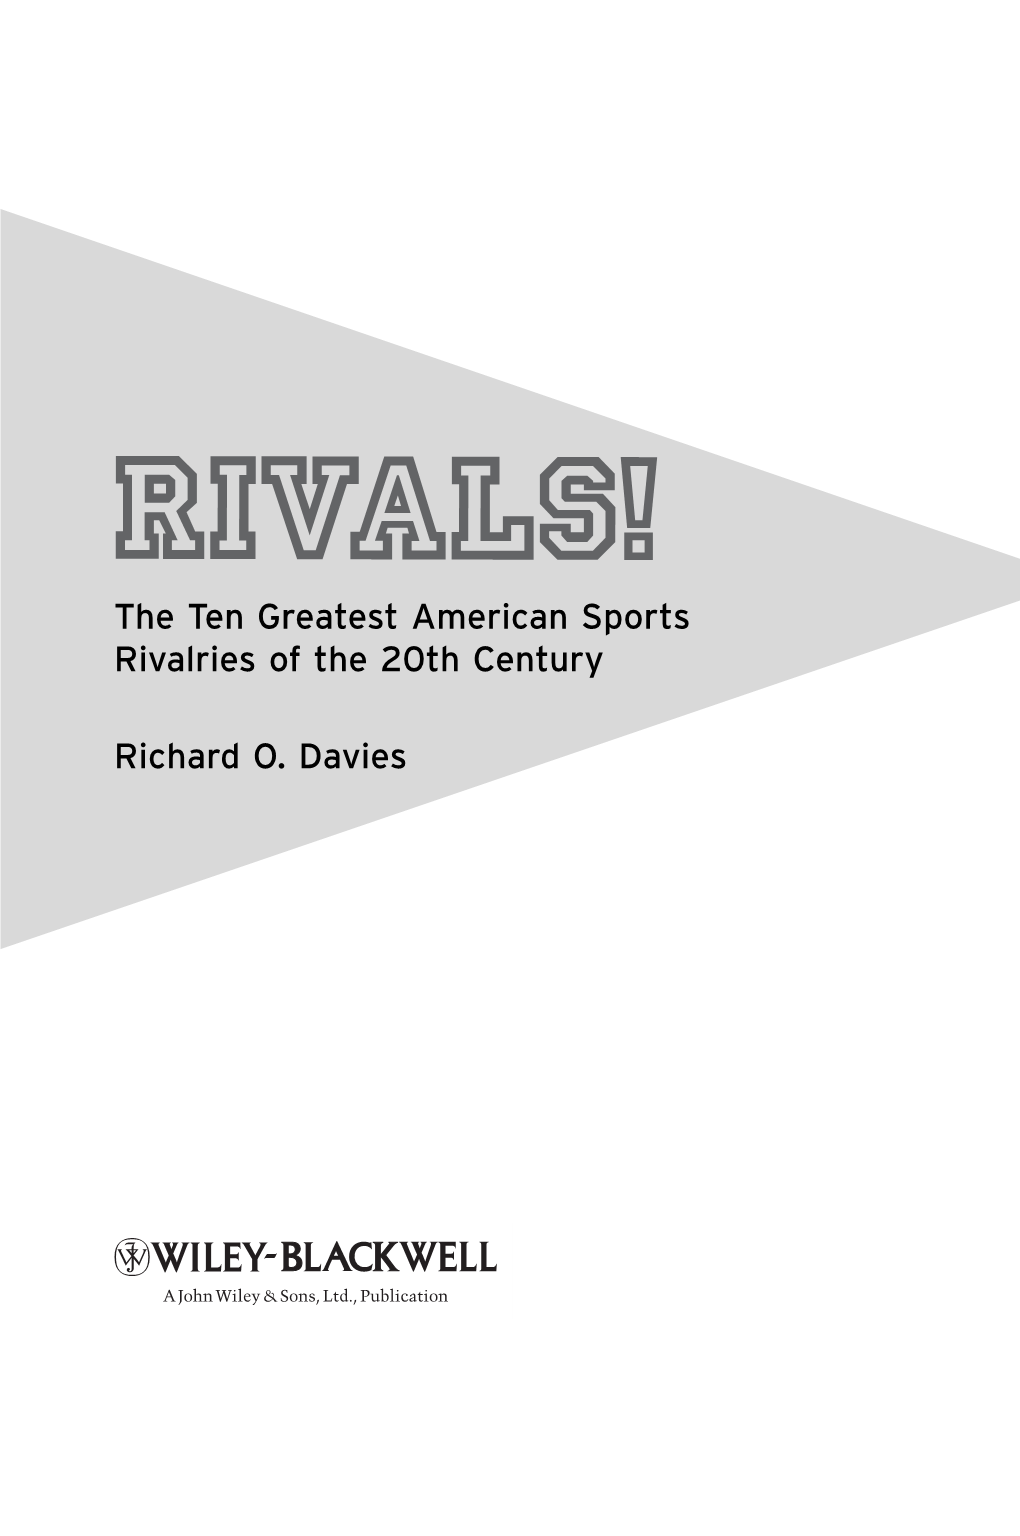 The Ten Greatest American Sports Rivalries of the 20Th Century